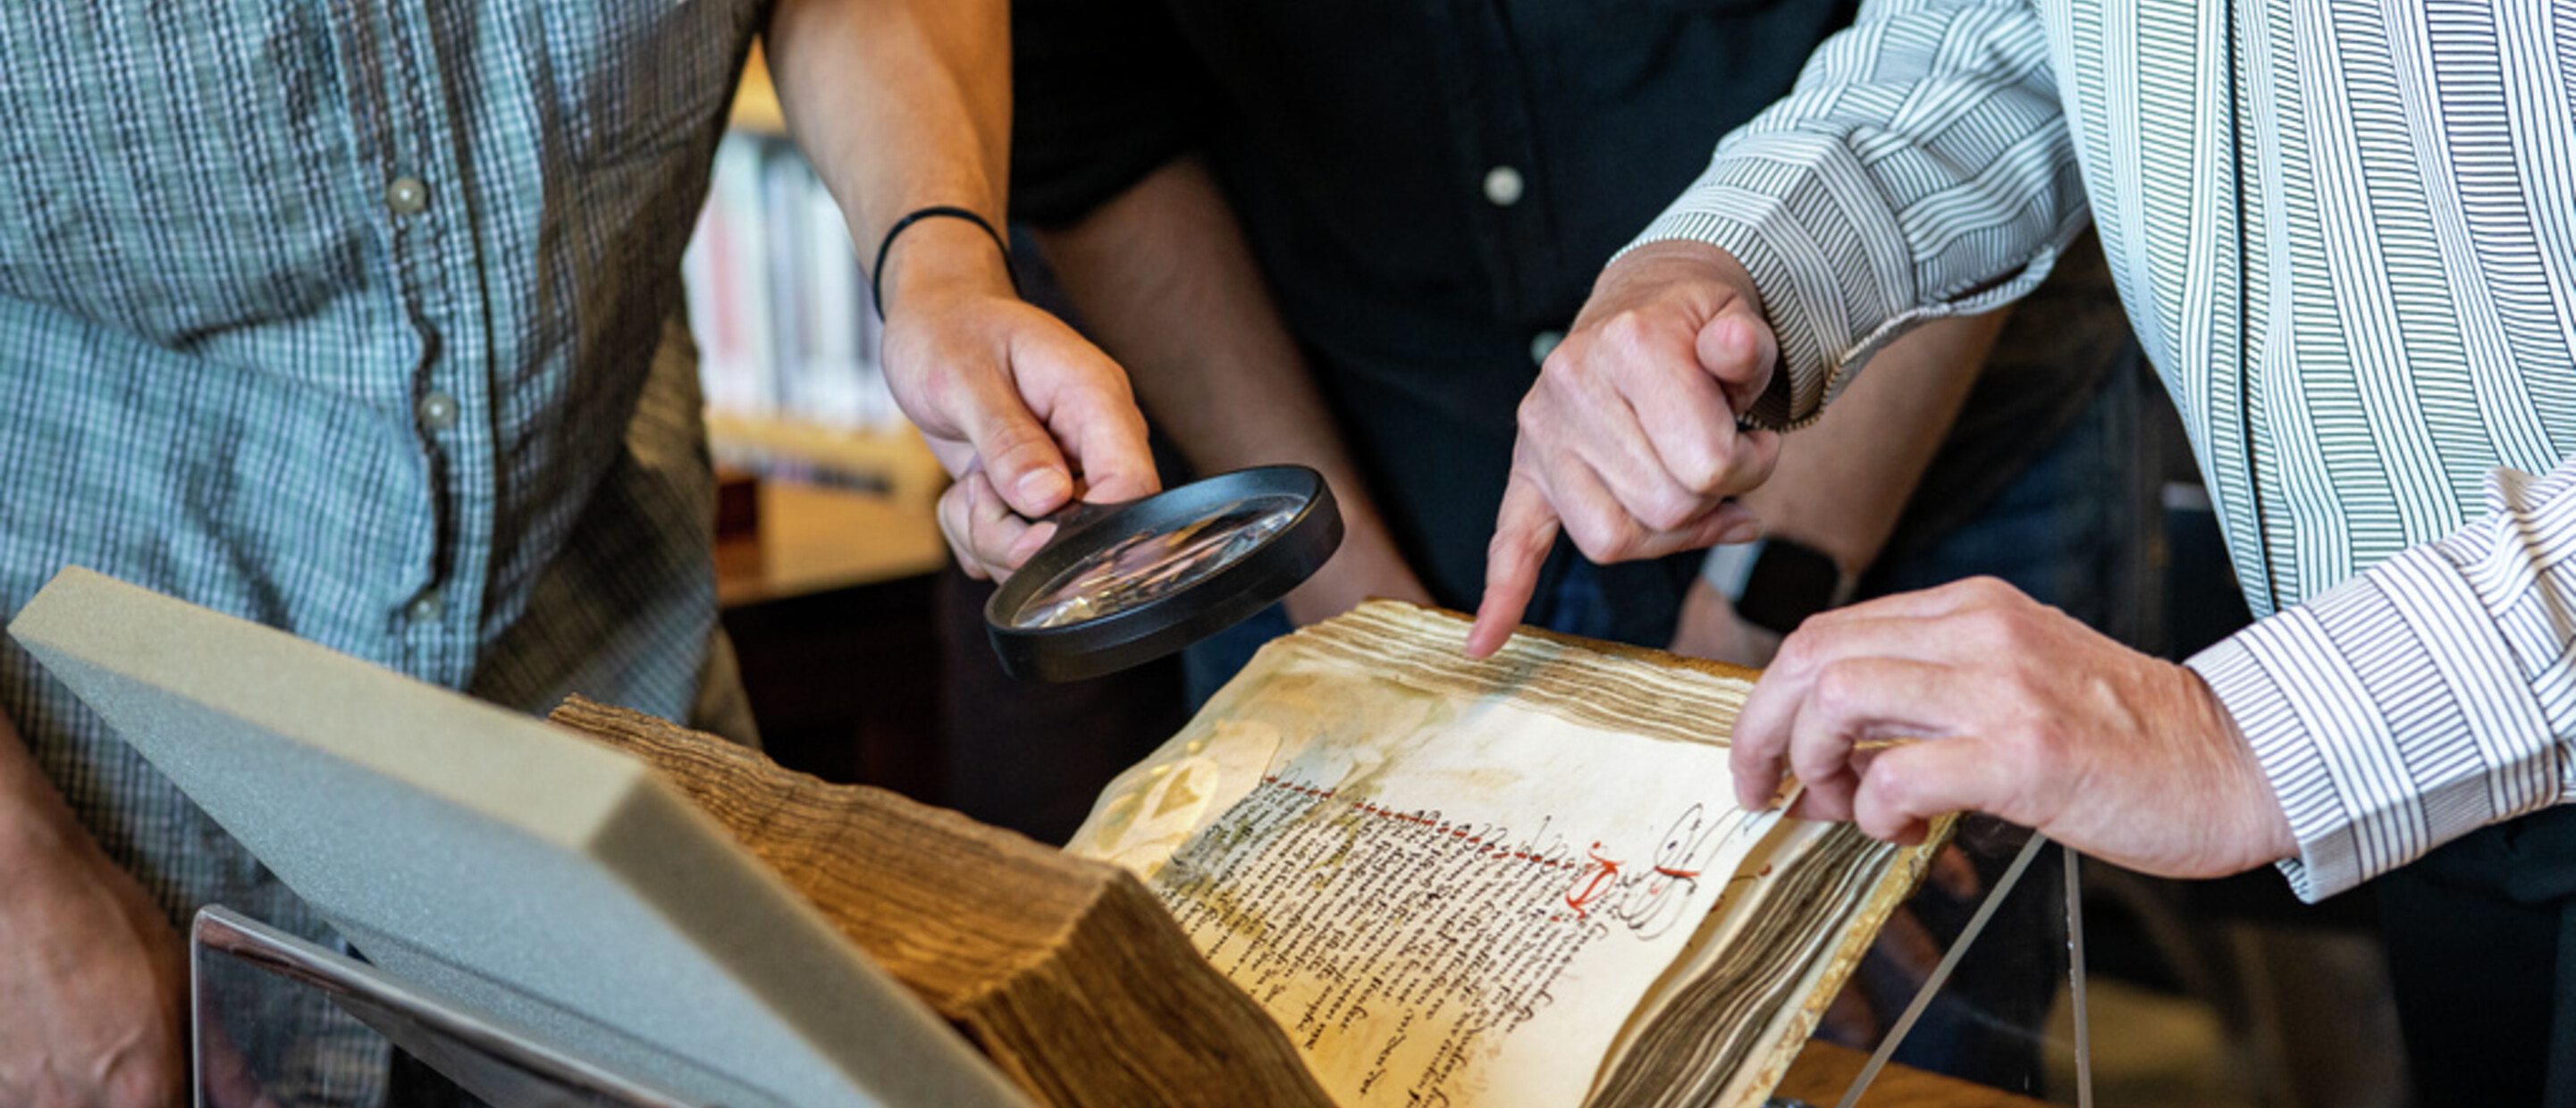 peoples hands pointing to and using magnifying glass to look at a manuscript